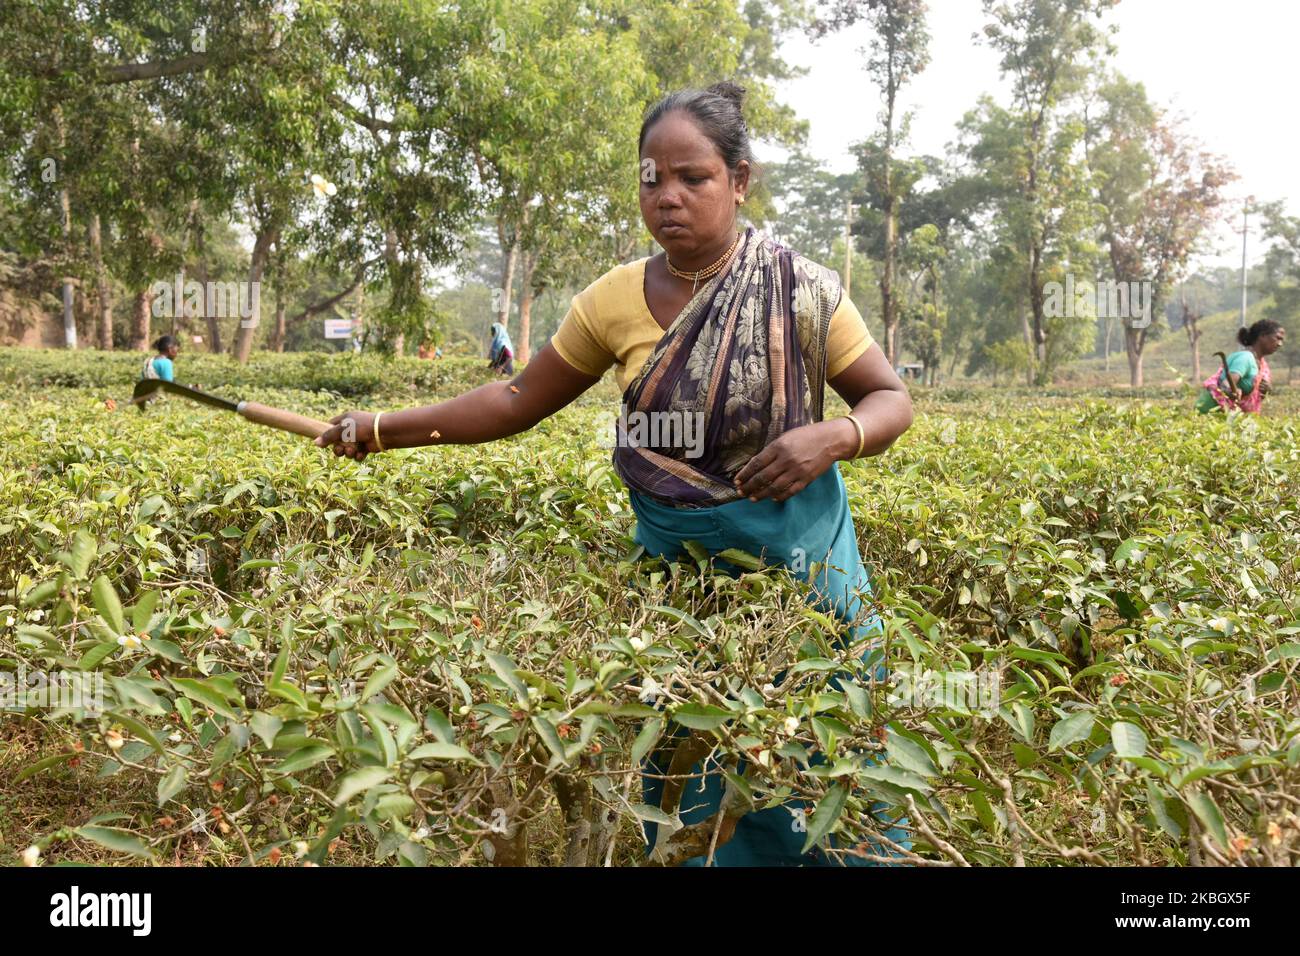 Bangladeshi women working in a tea garden in Sylhet, Bangladesh, on February 11, 2020. Tea Plucking is a specialized skill. Two leaves and a bud need to be plucked in order to get the best taste and profitability. The calculation of daily wage is 75tk(1$) for plucking at least 22-23 kg leaves per day for a worker. The area of Sylhet has over 150 gardens including three of the largest tea gardens in the world both in area and production. Nearly 300,000 workers are employed on the tea estates of which over 75% are women but they are passing their lives as a slave. (Photo by Mamunur Rashid/NurPho Stock Photo